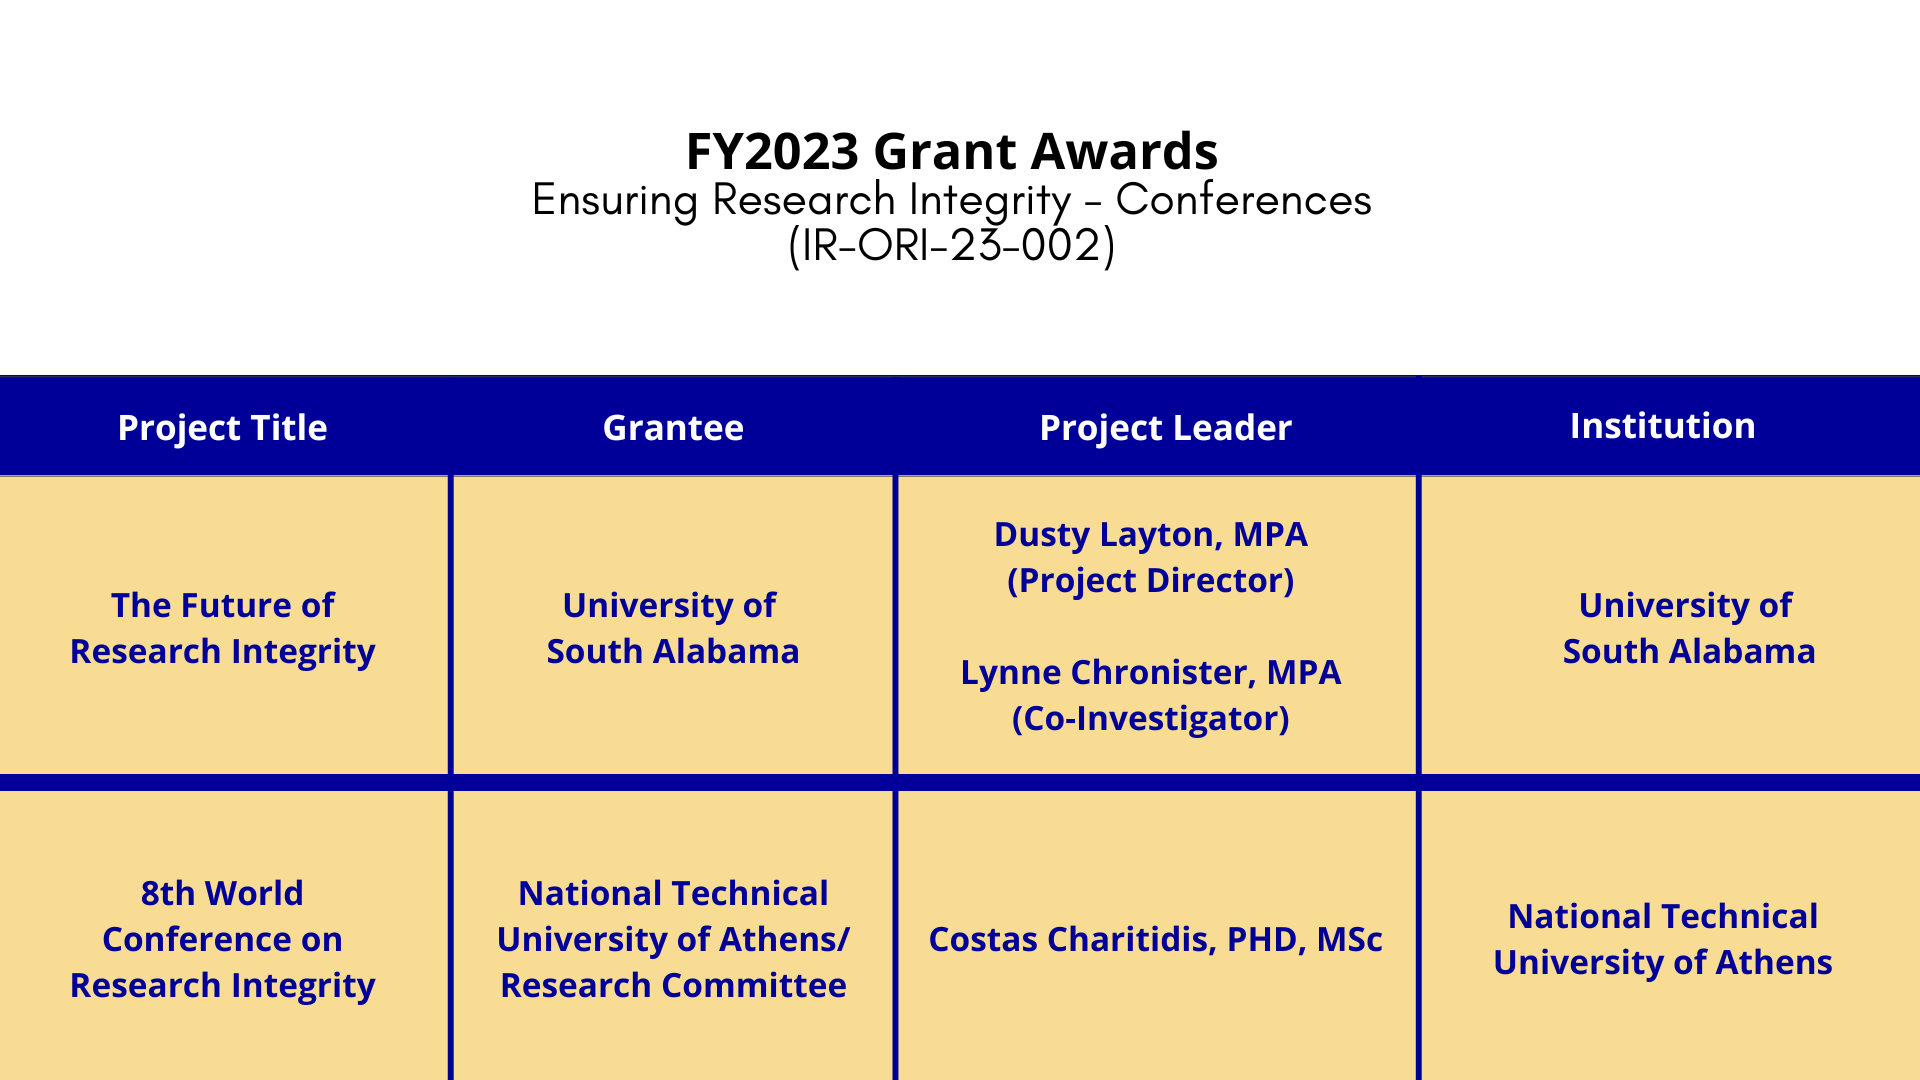 This is a table showing the project titles, grantees, project leaders, and the institutions who received Fiscal Year 2023 Grant Awards.